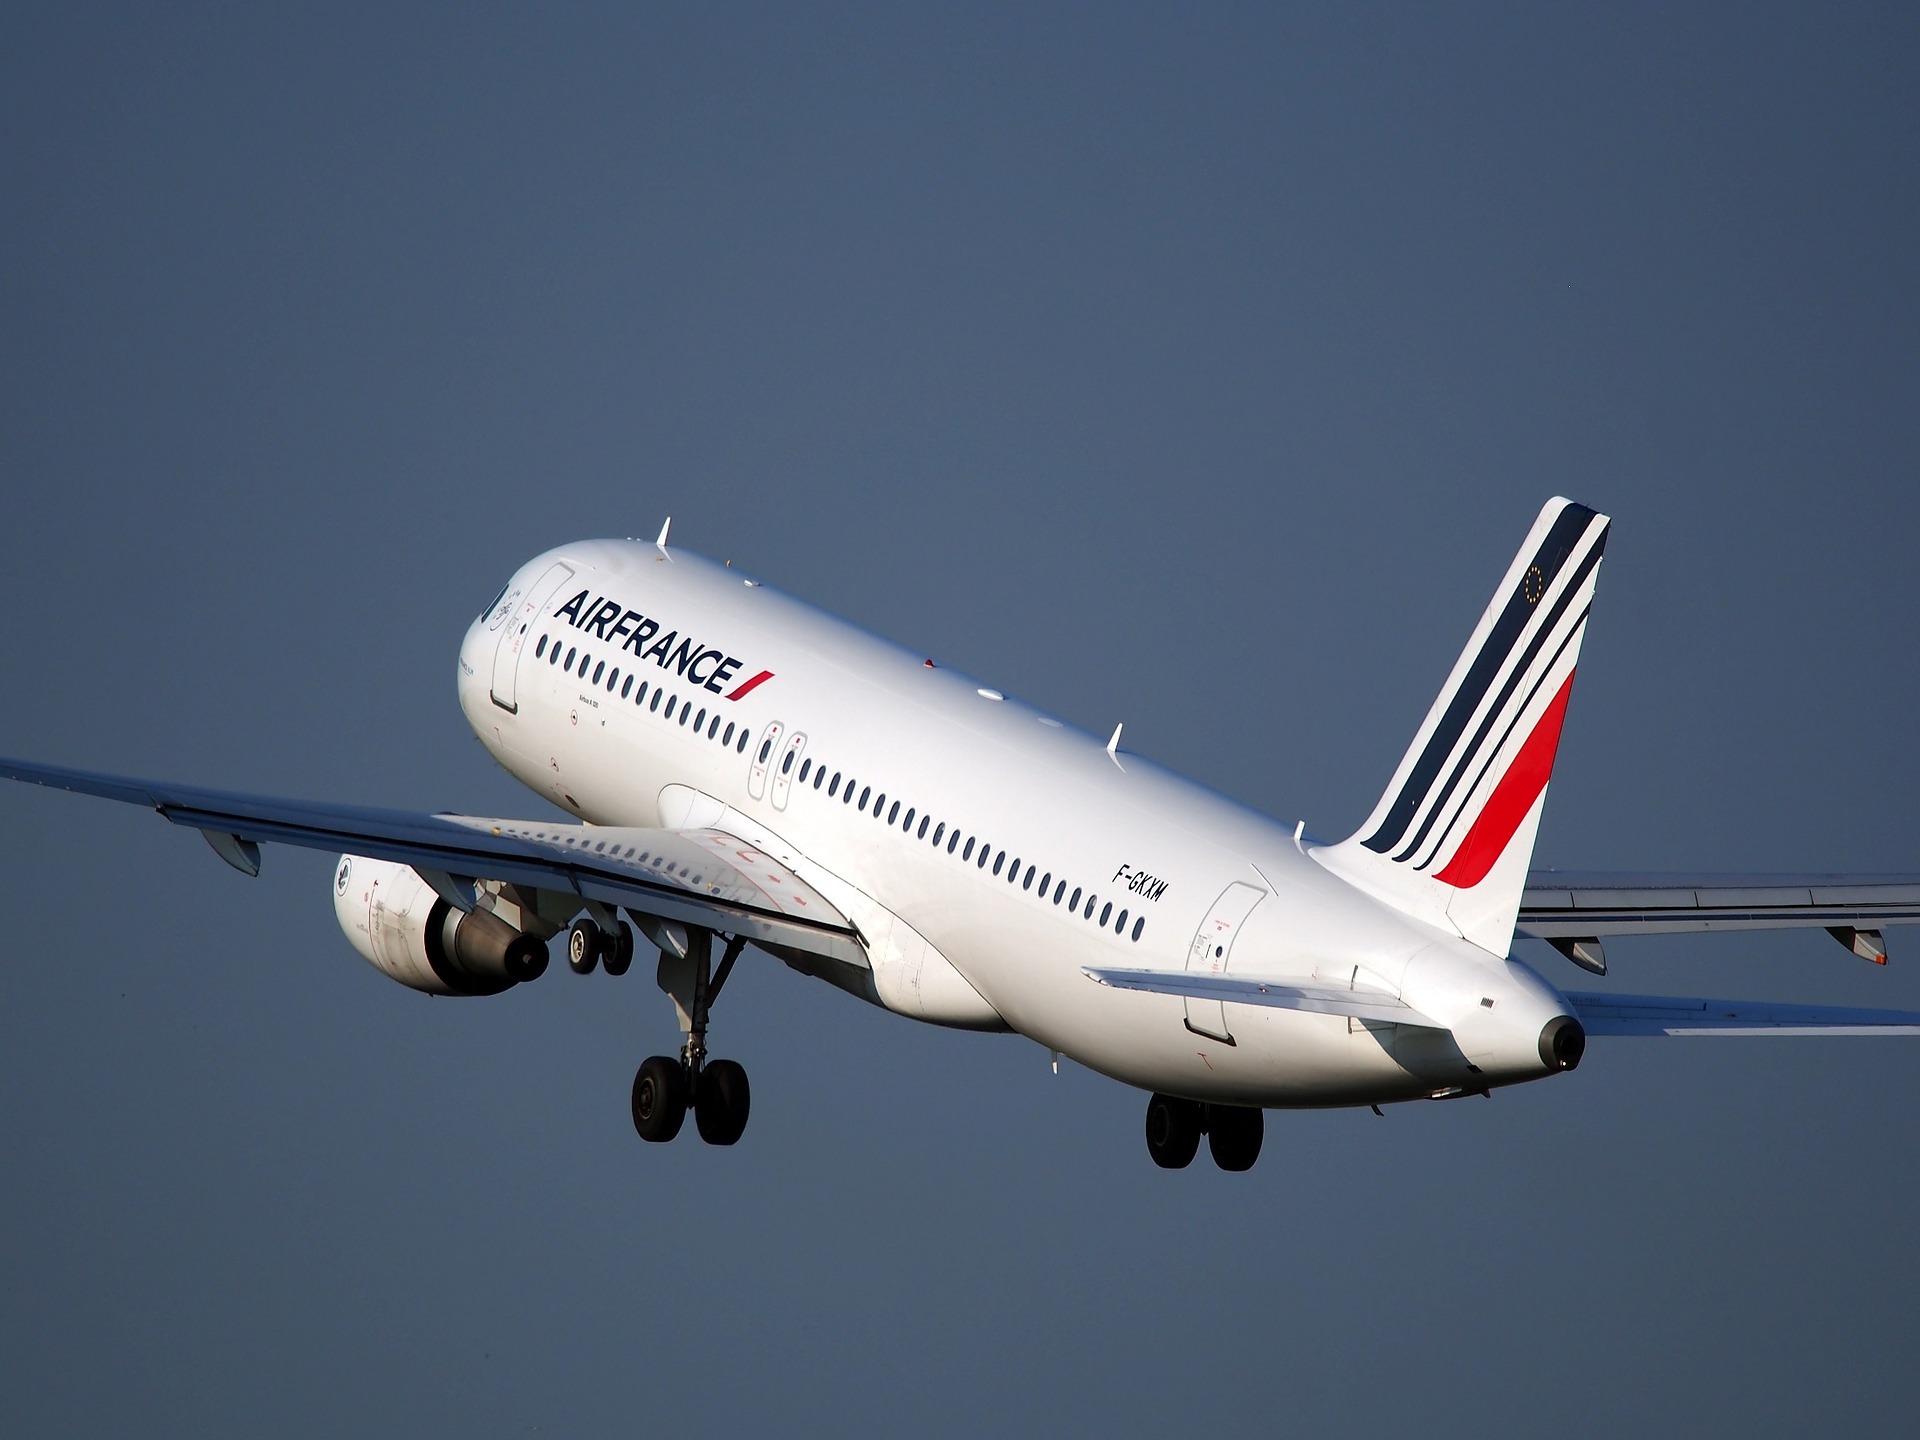 Air France can Transfer Points to Someone Else